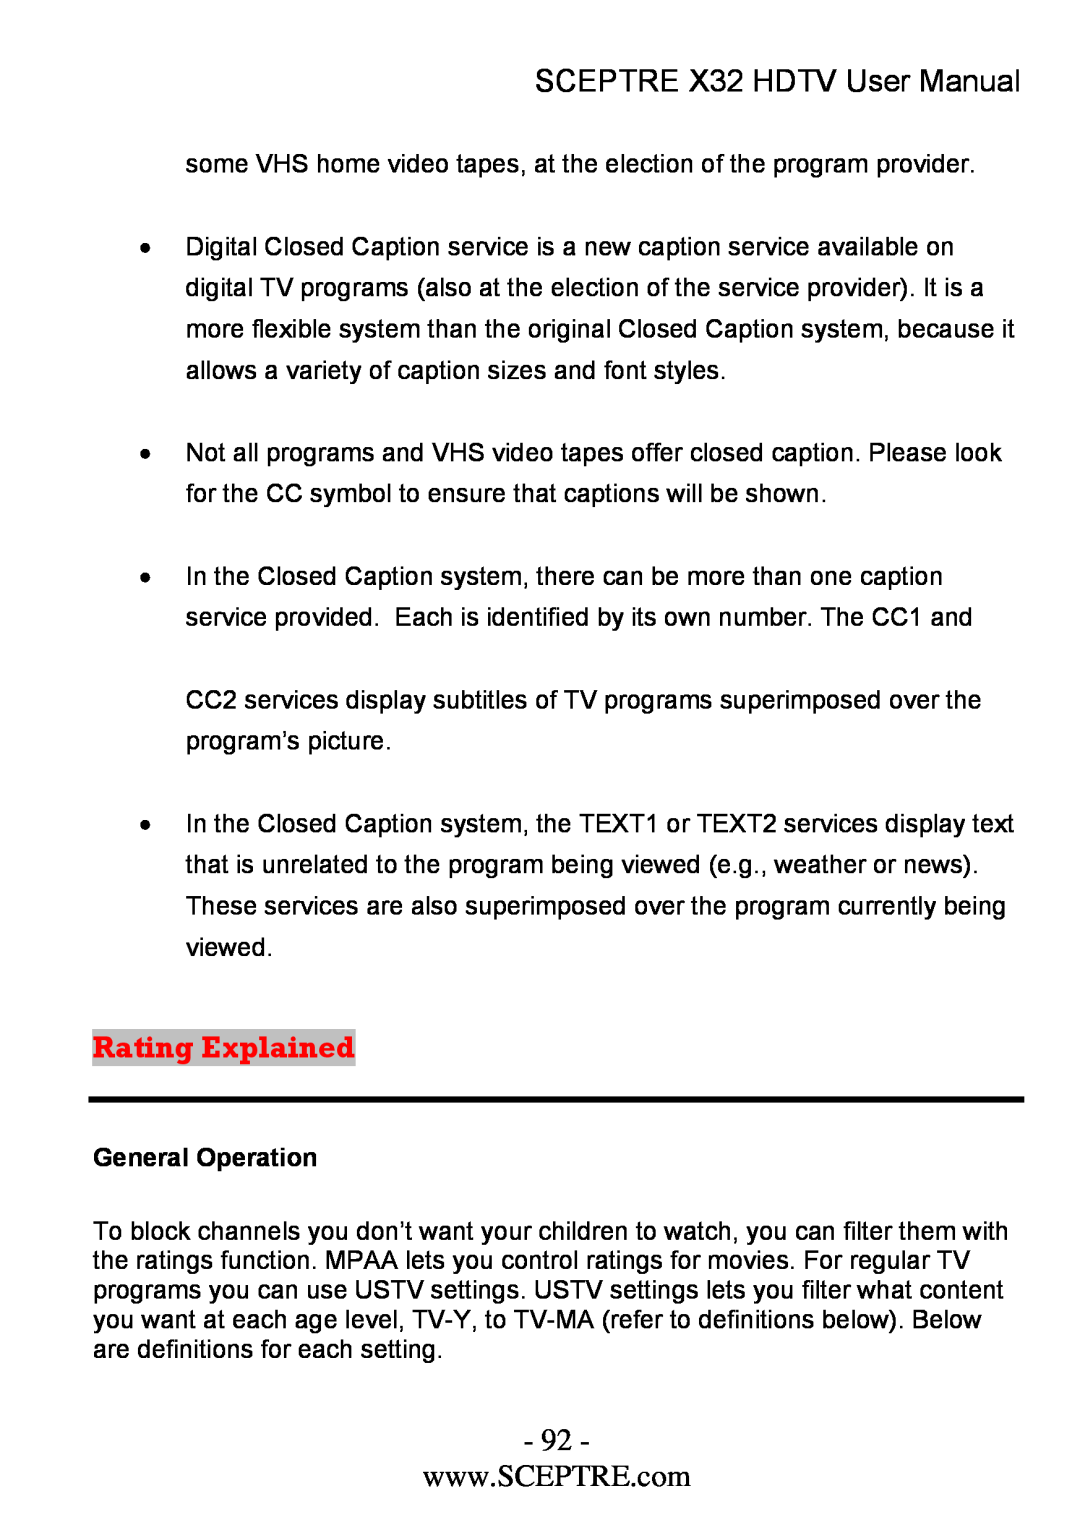 Sceptre Technologies x32 user manual Rating Explained, SCEPTRE X32 HDTV User Manual, General Operation 